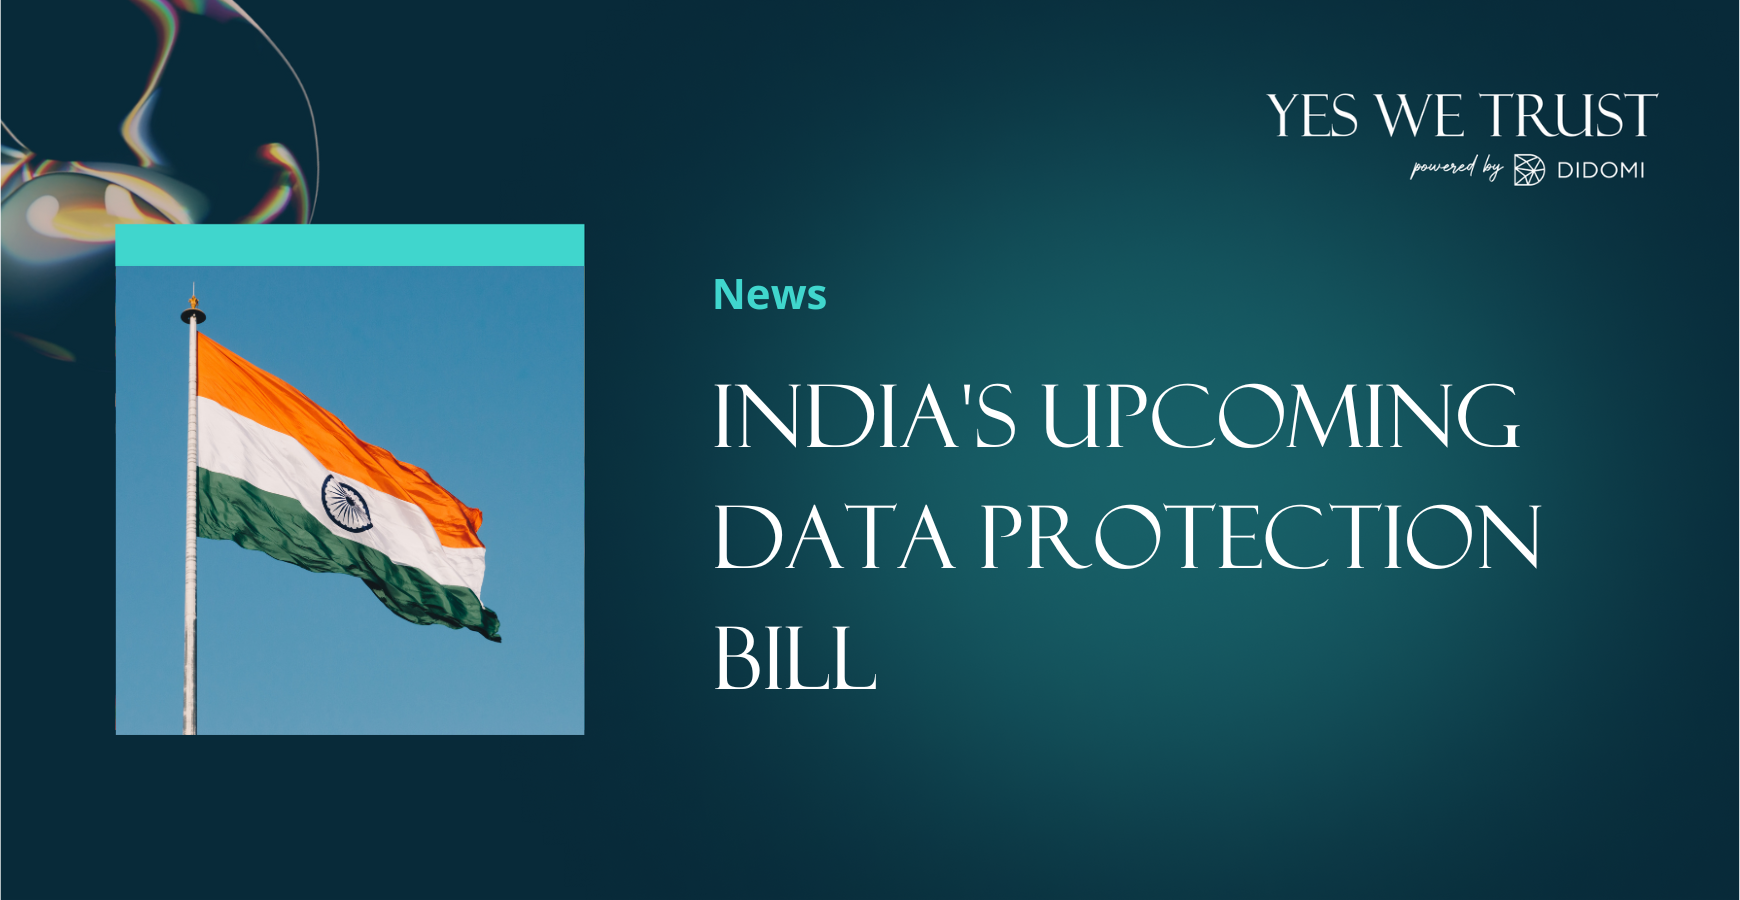 India's data protection bill to provide safe internet to its 1.2B consumers